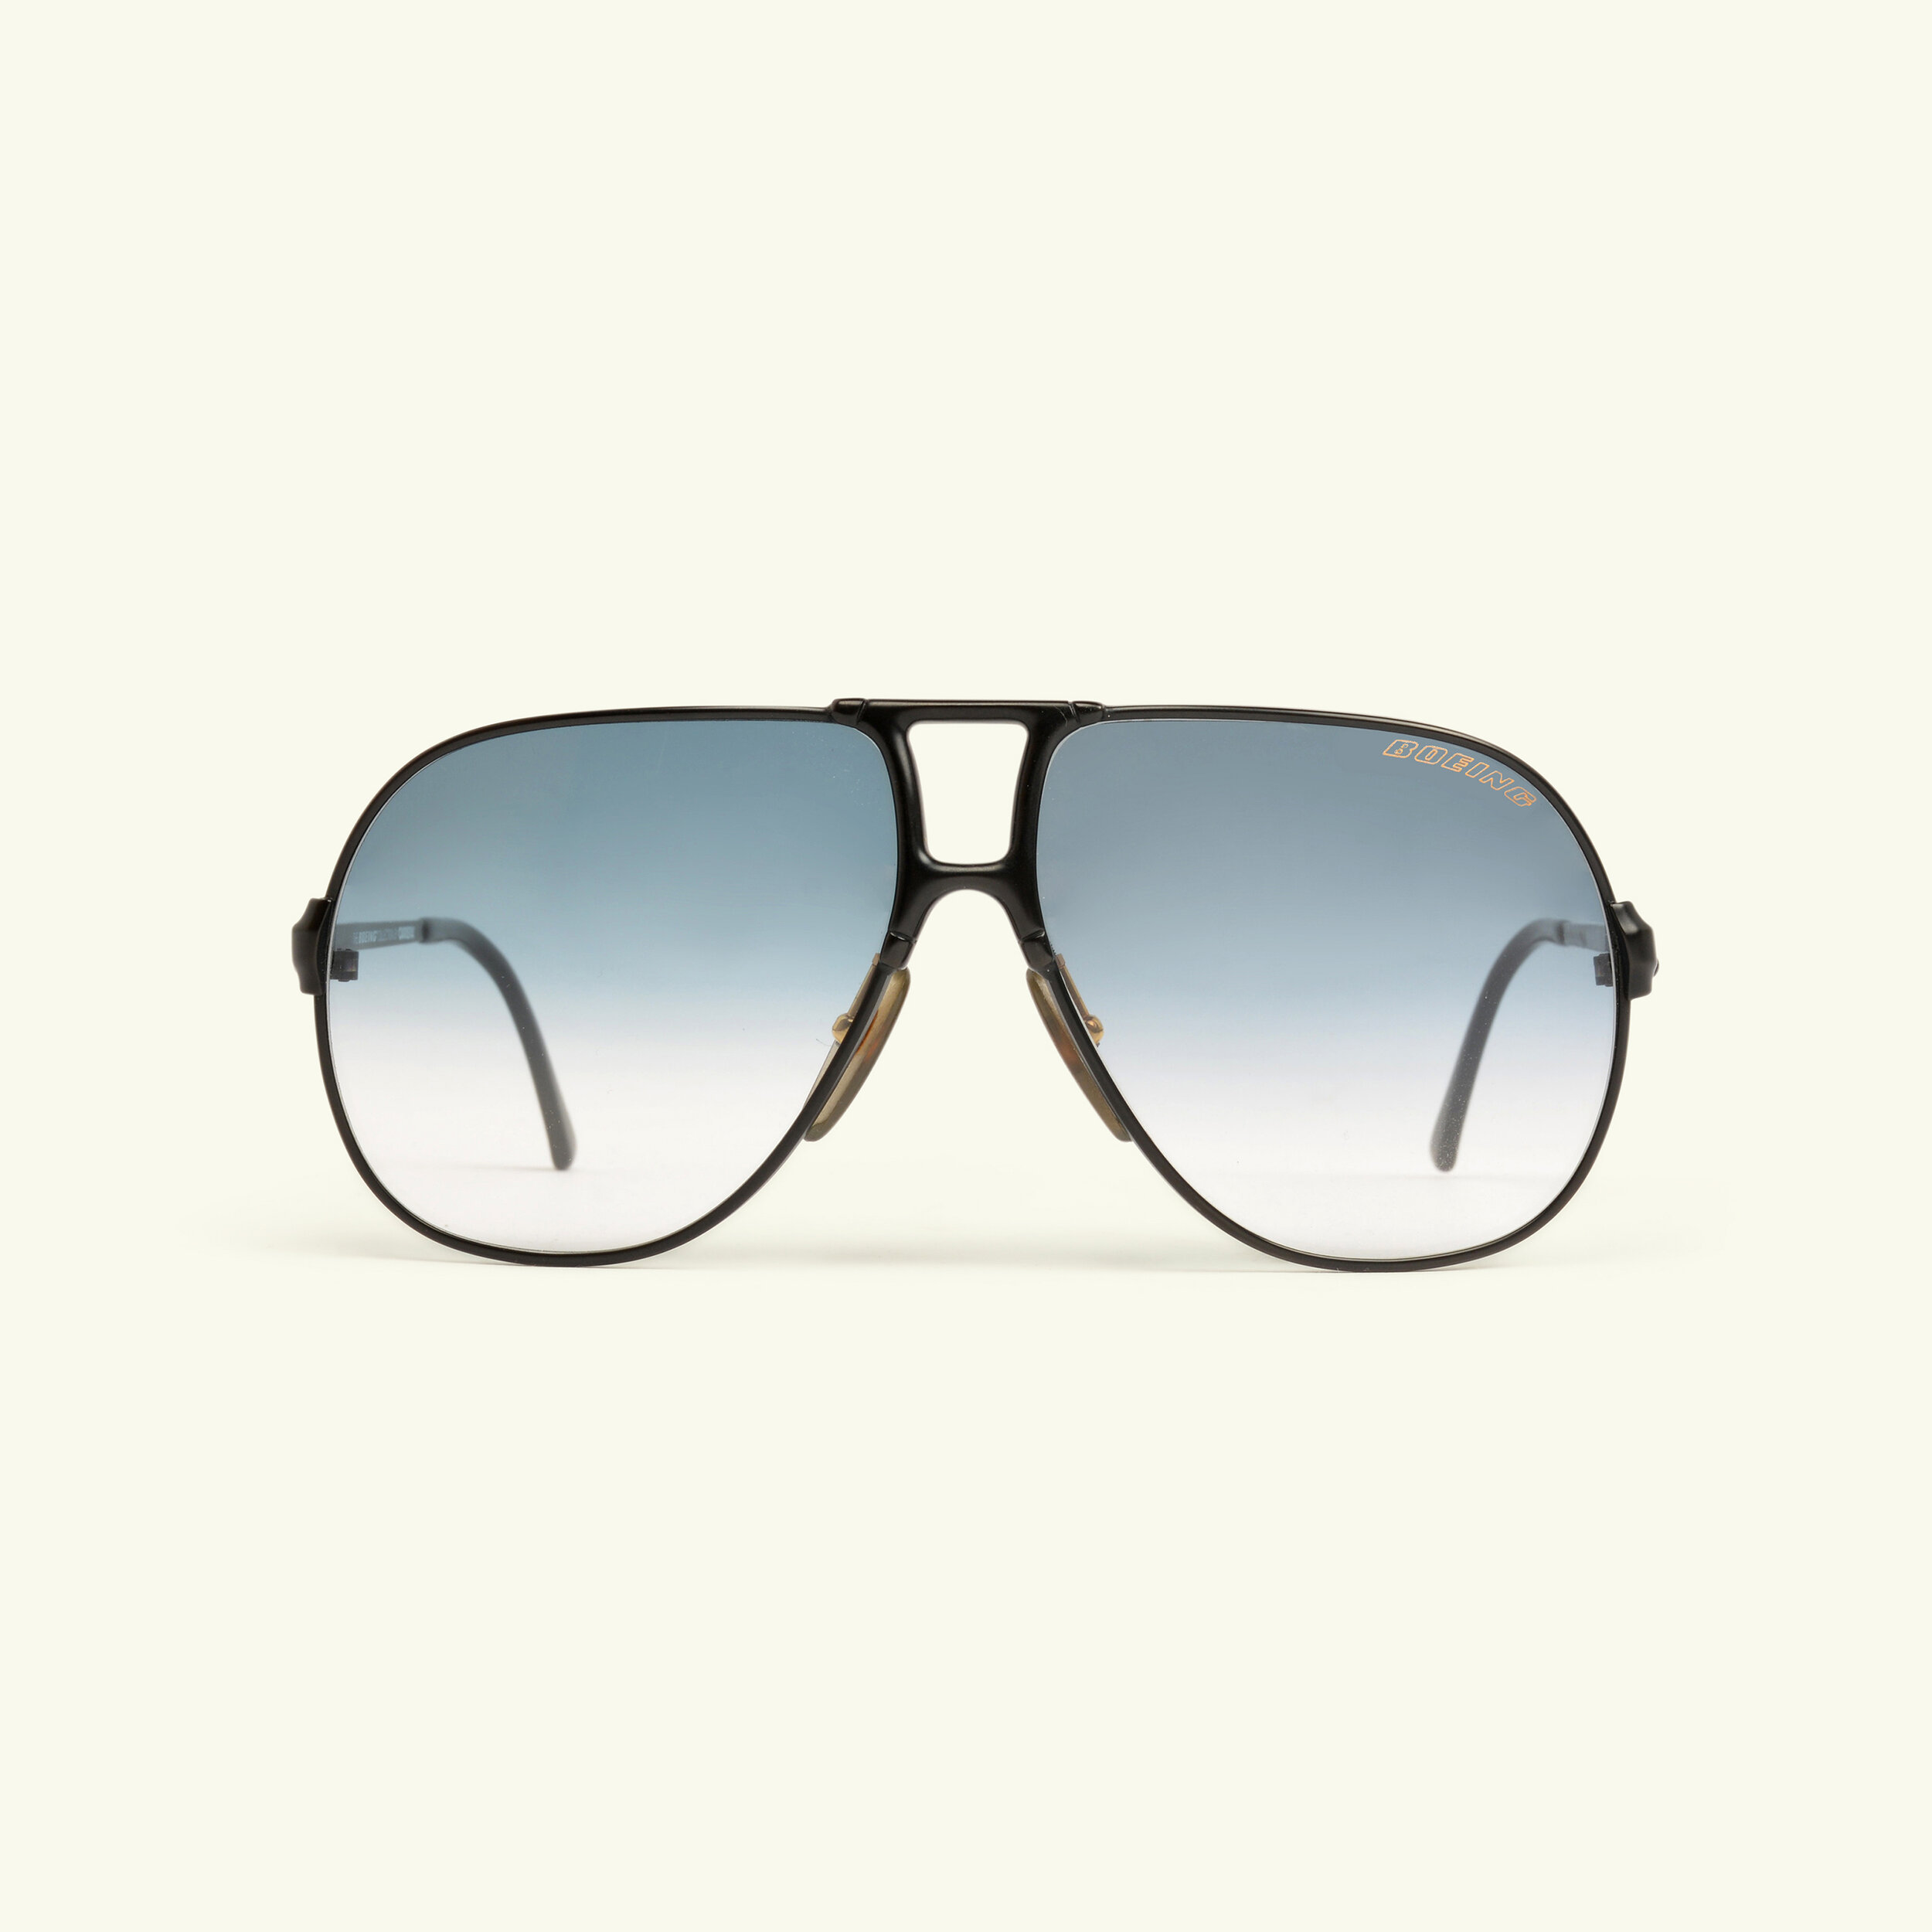  Boeing by Carrera 5700 90 sunglasses by Culture Frames — LE VIF